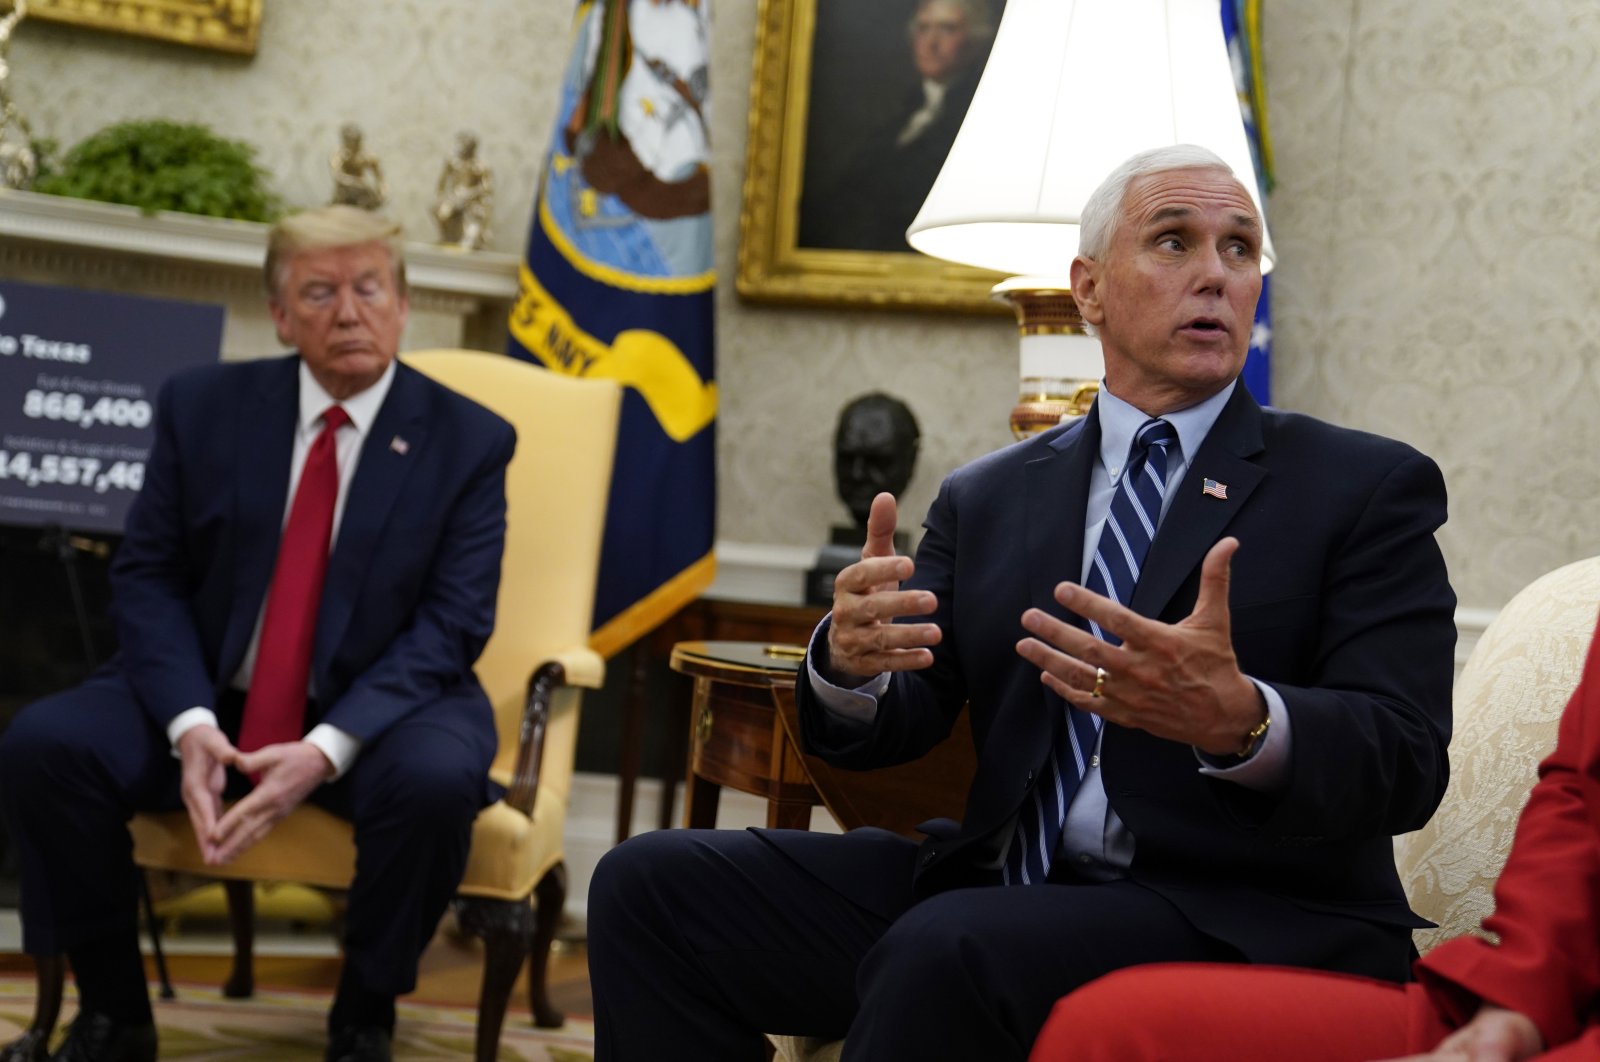 U.S. President Donald Trump listens as Vice President Mike Pence speaks during a meeting about the coronavirus response with Gov. Greg Abbott, R-Texas, in the Oval Office of the White House, Thursday, May 7, 2020, in Washington. (AP Photo)